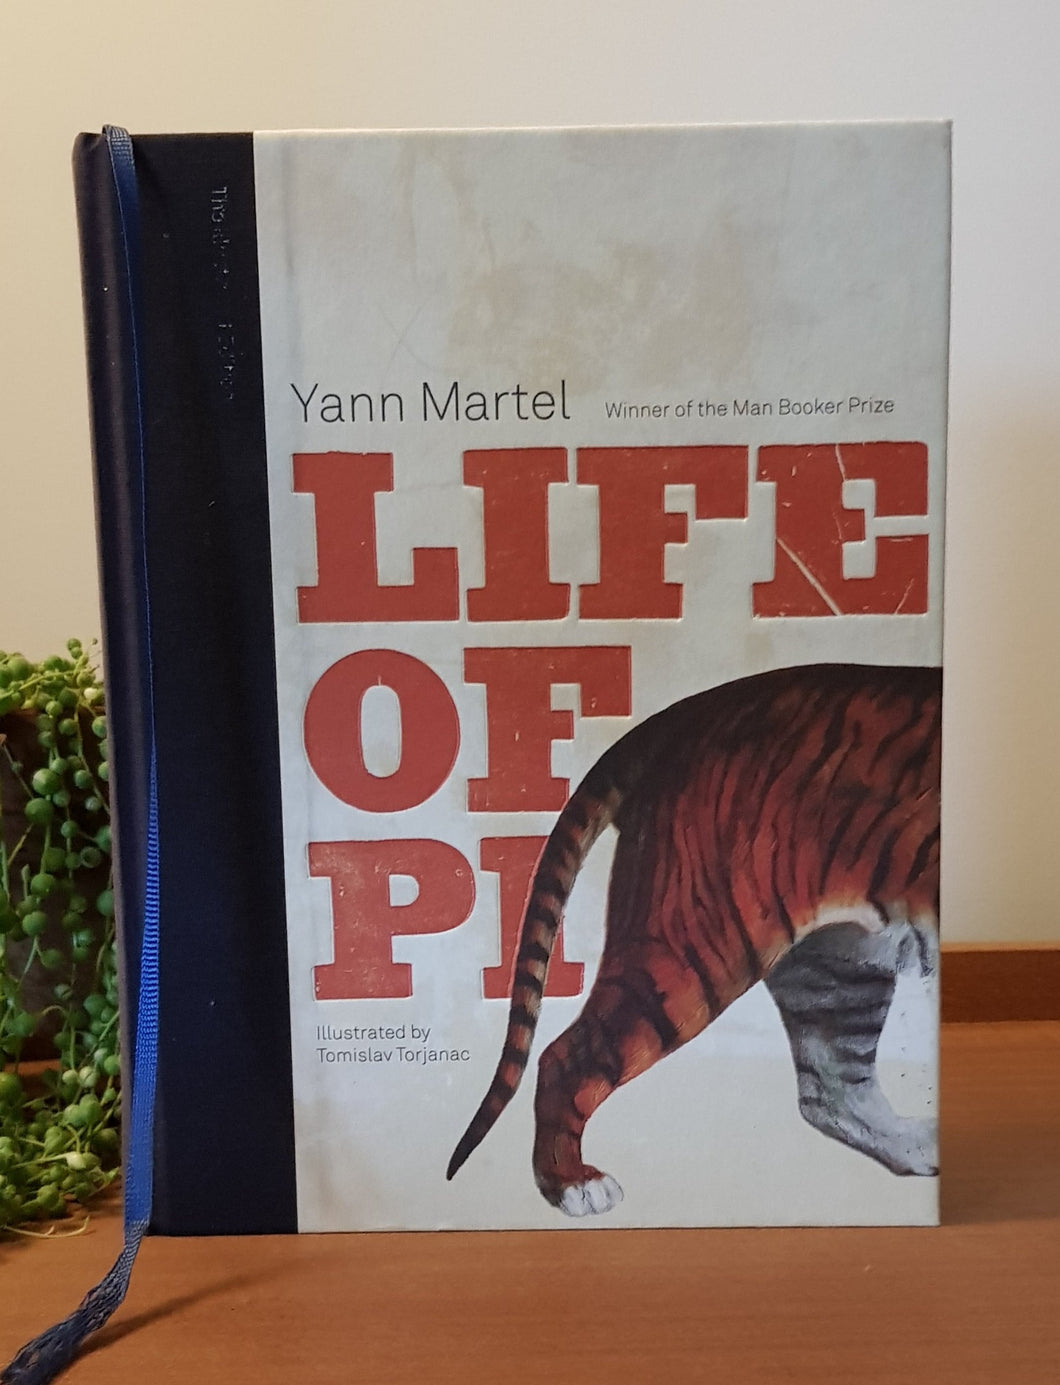 The Life of Pi (Illustrated Edition) by Yannick Martel, Illustrated by Tomislav Torjanac